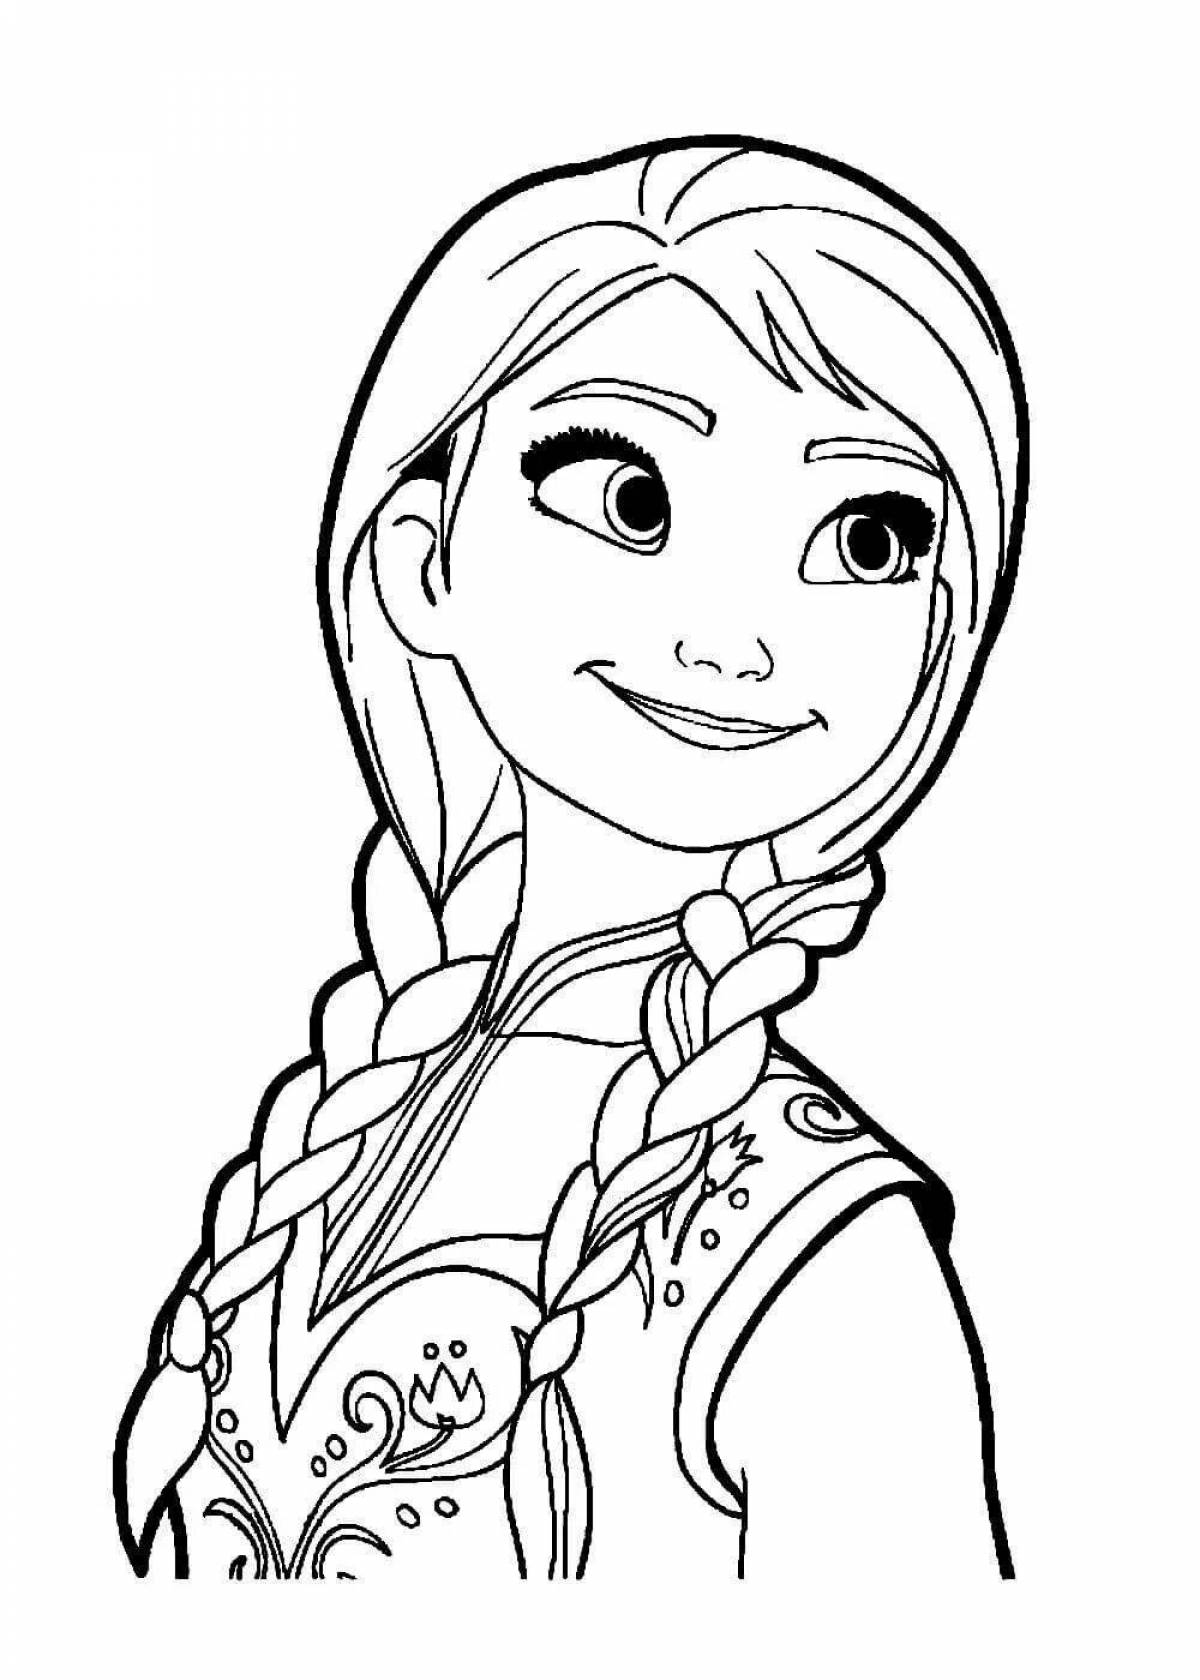 Exquisite elsa coloring book for 4-5 year olds